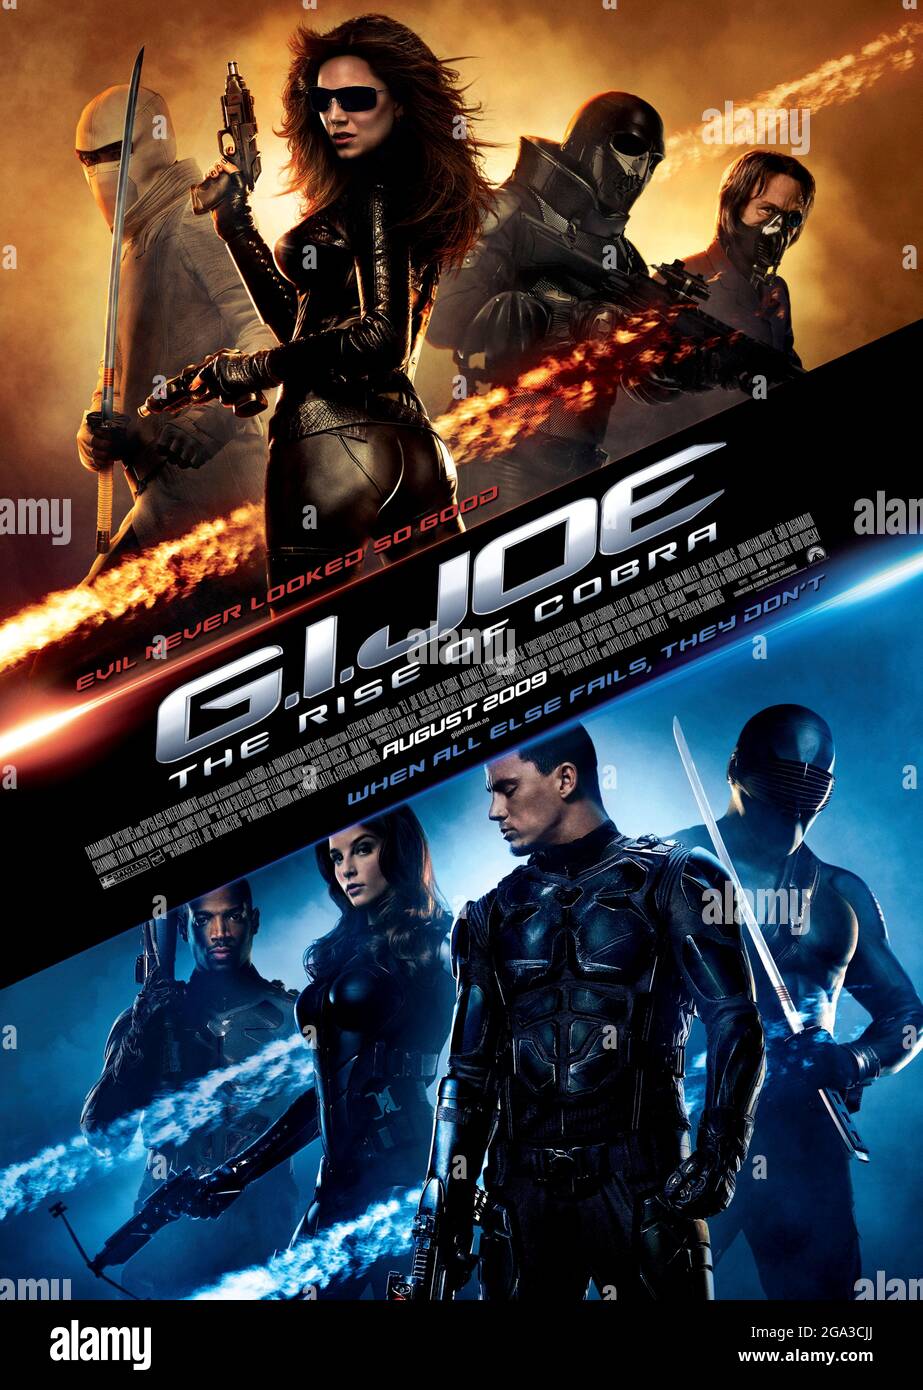 G.I. Joe: The Rise of Cobra (2009) directed by Stephen Sommers and starring Dennis Quaid, Channing Tatum and Marlon Wayans. An elite military unit comprised of special operatives known as G.I. Joe, based on characters from the popular Hasbro toyline. Stock Photo